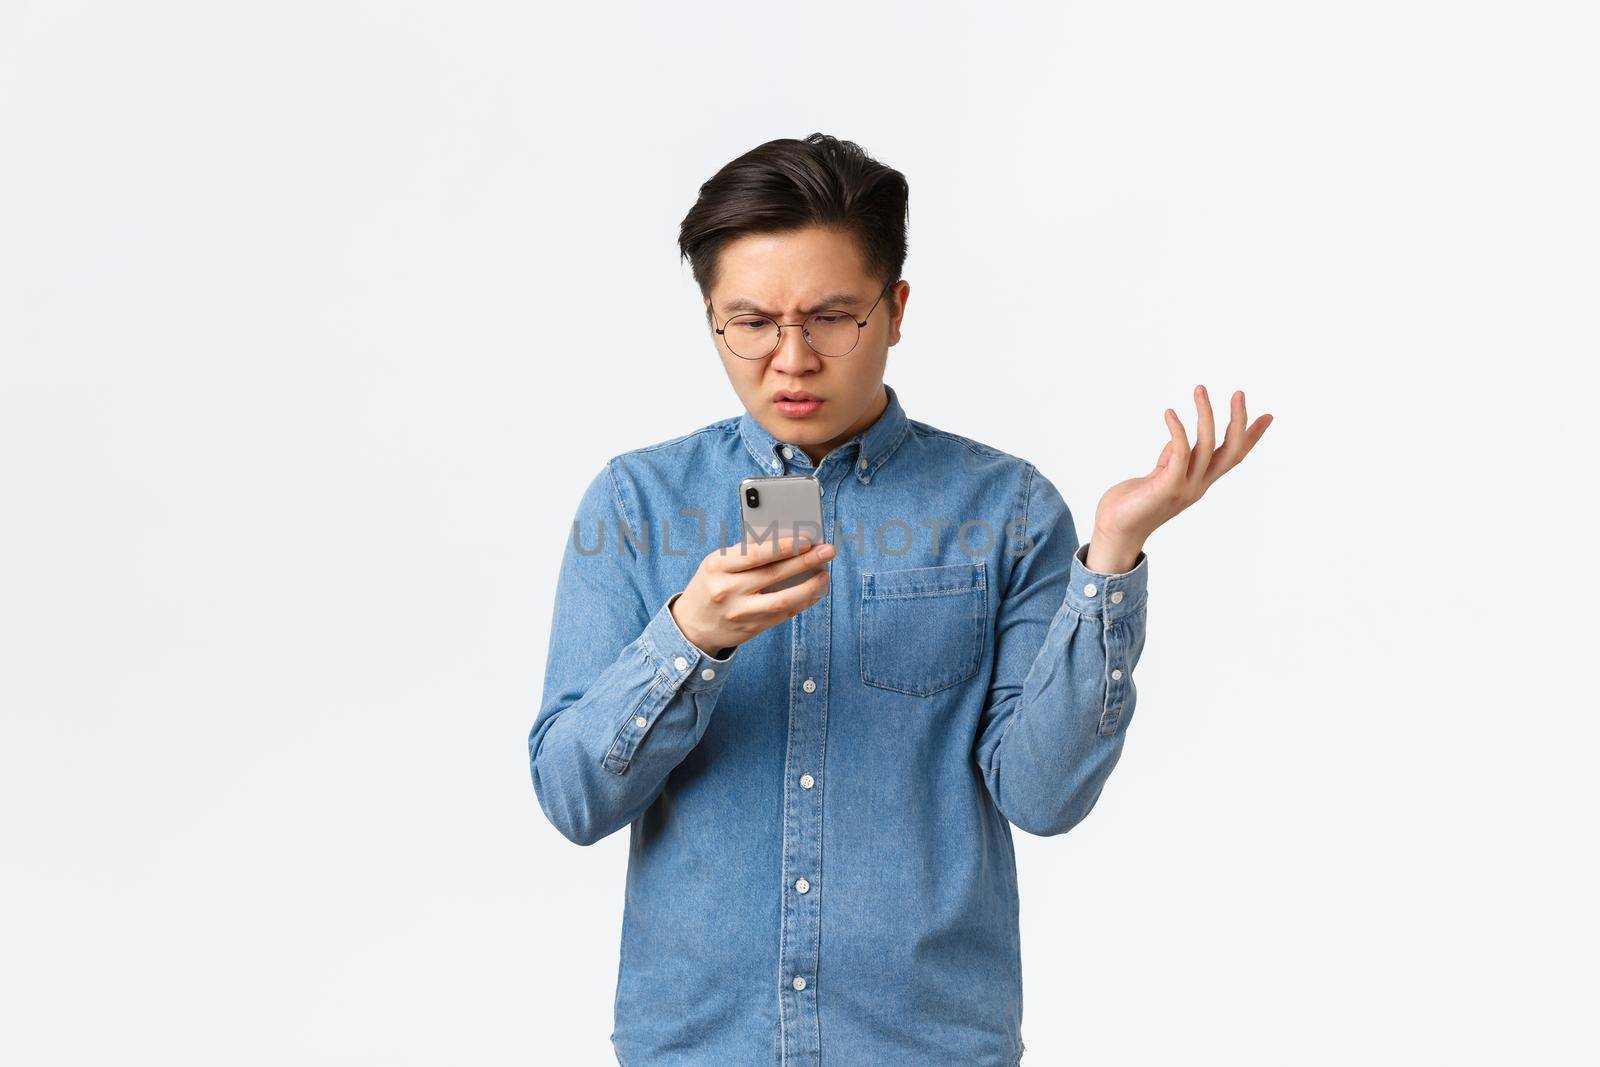 Frustrated and confused asian guy in glasses looking puzzled at mobile phone screen, raising hand up questioned, cant understand what happening online, standing white background perplexed.